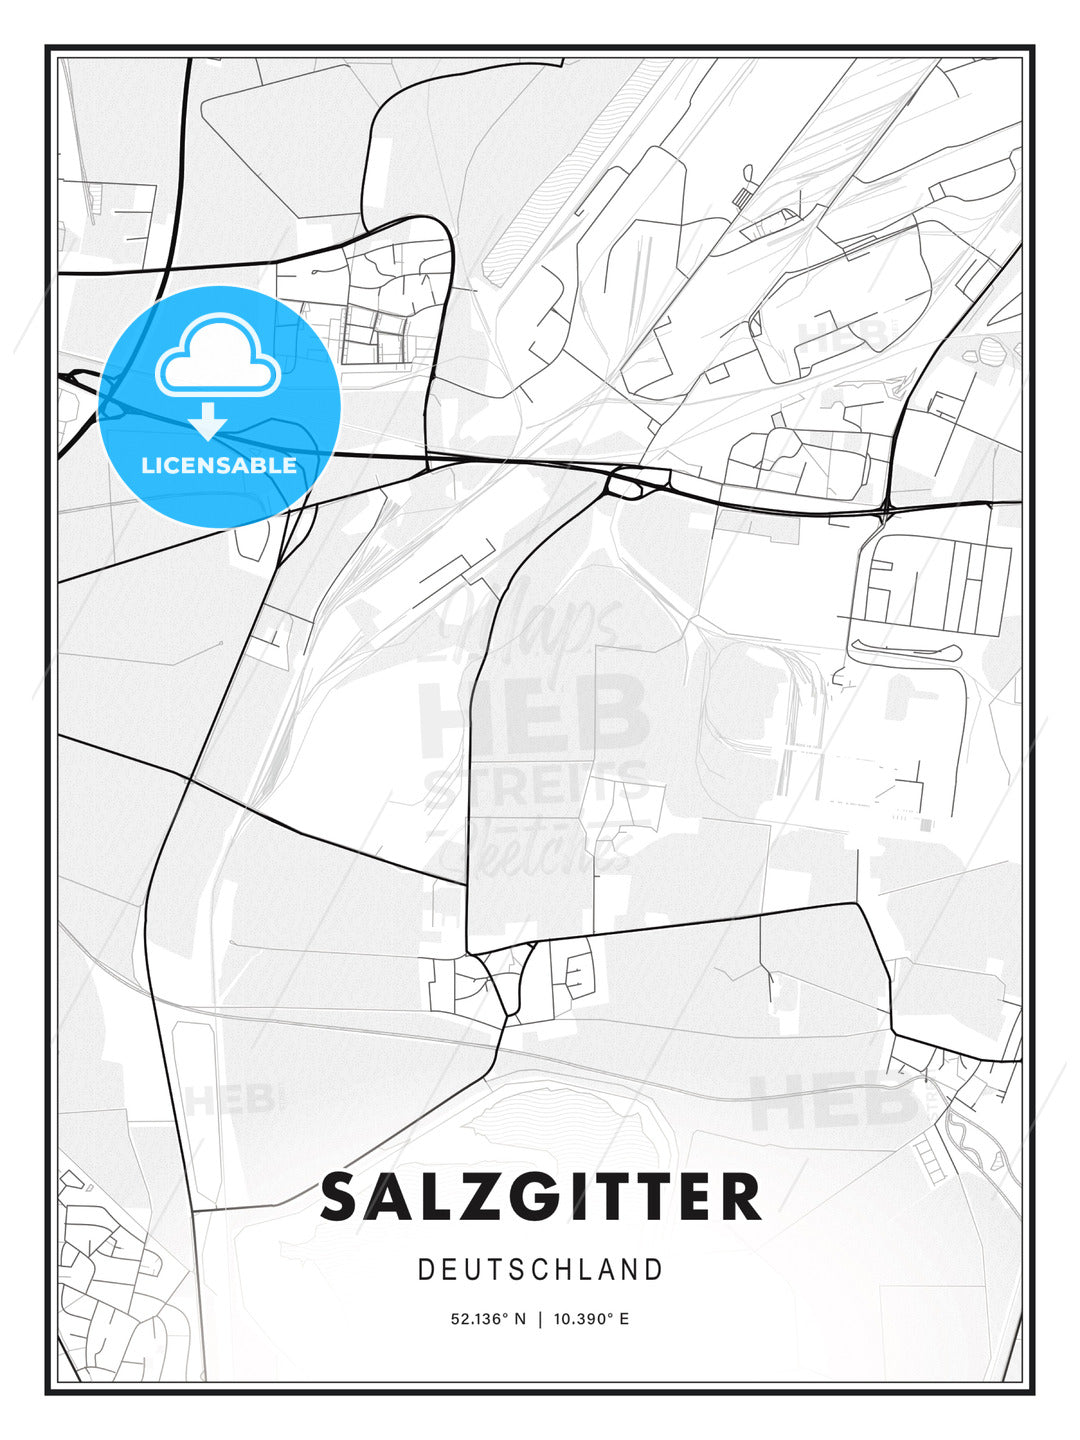 Salzgitter, Germany, Modern Print Template in Various Formats - HEBSTREITS Sketches